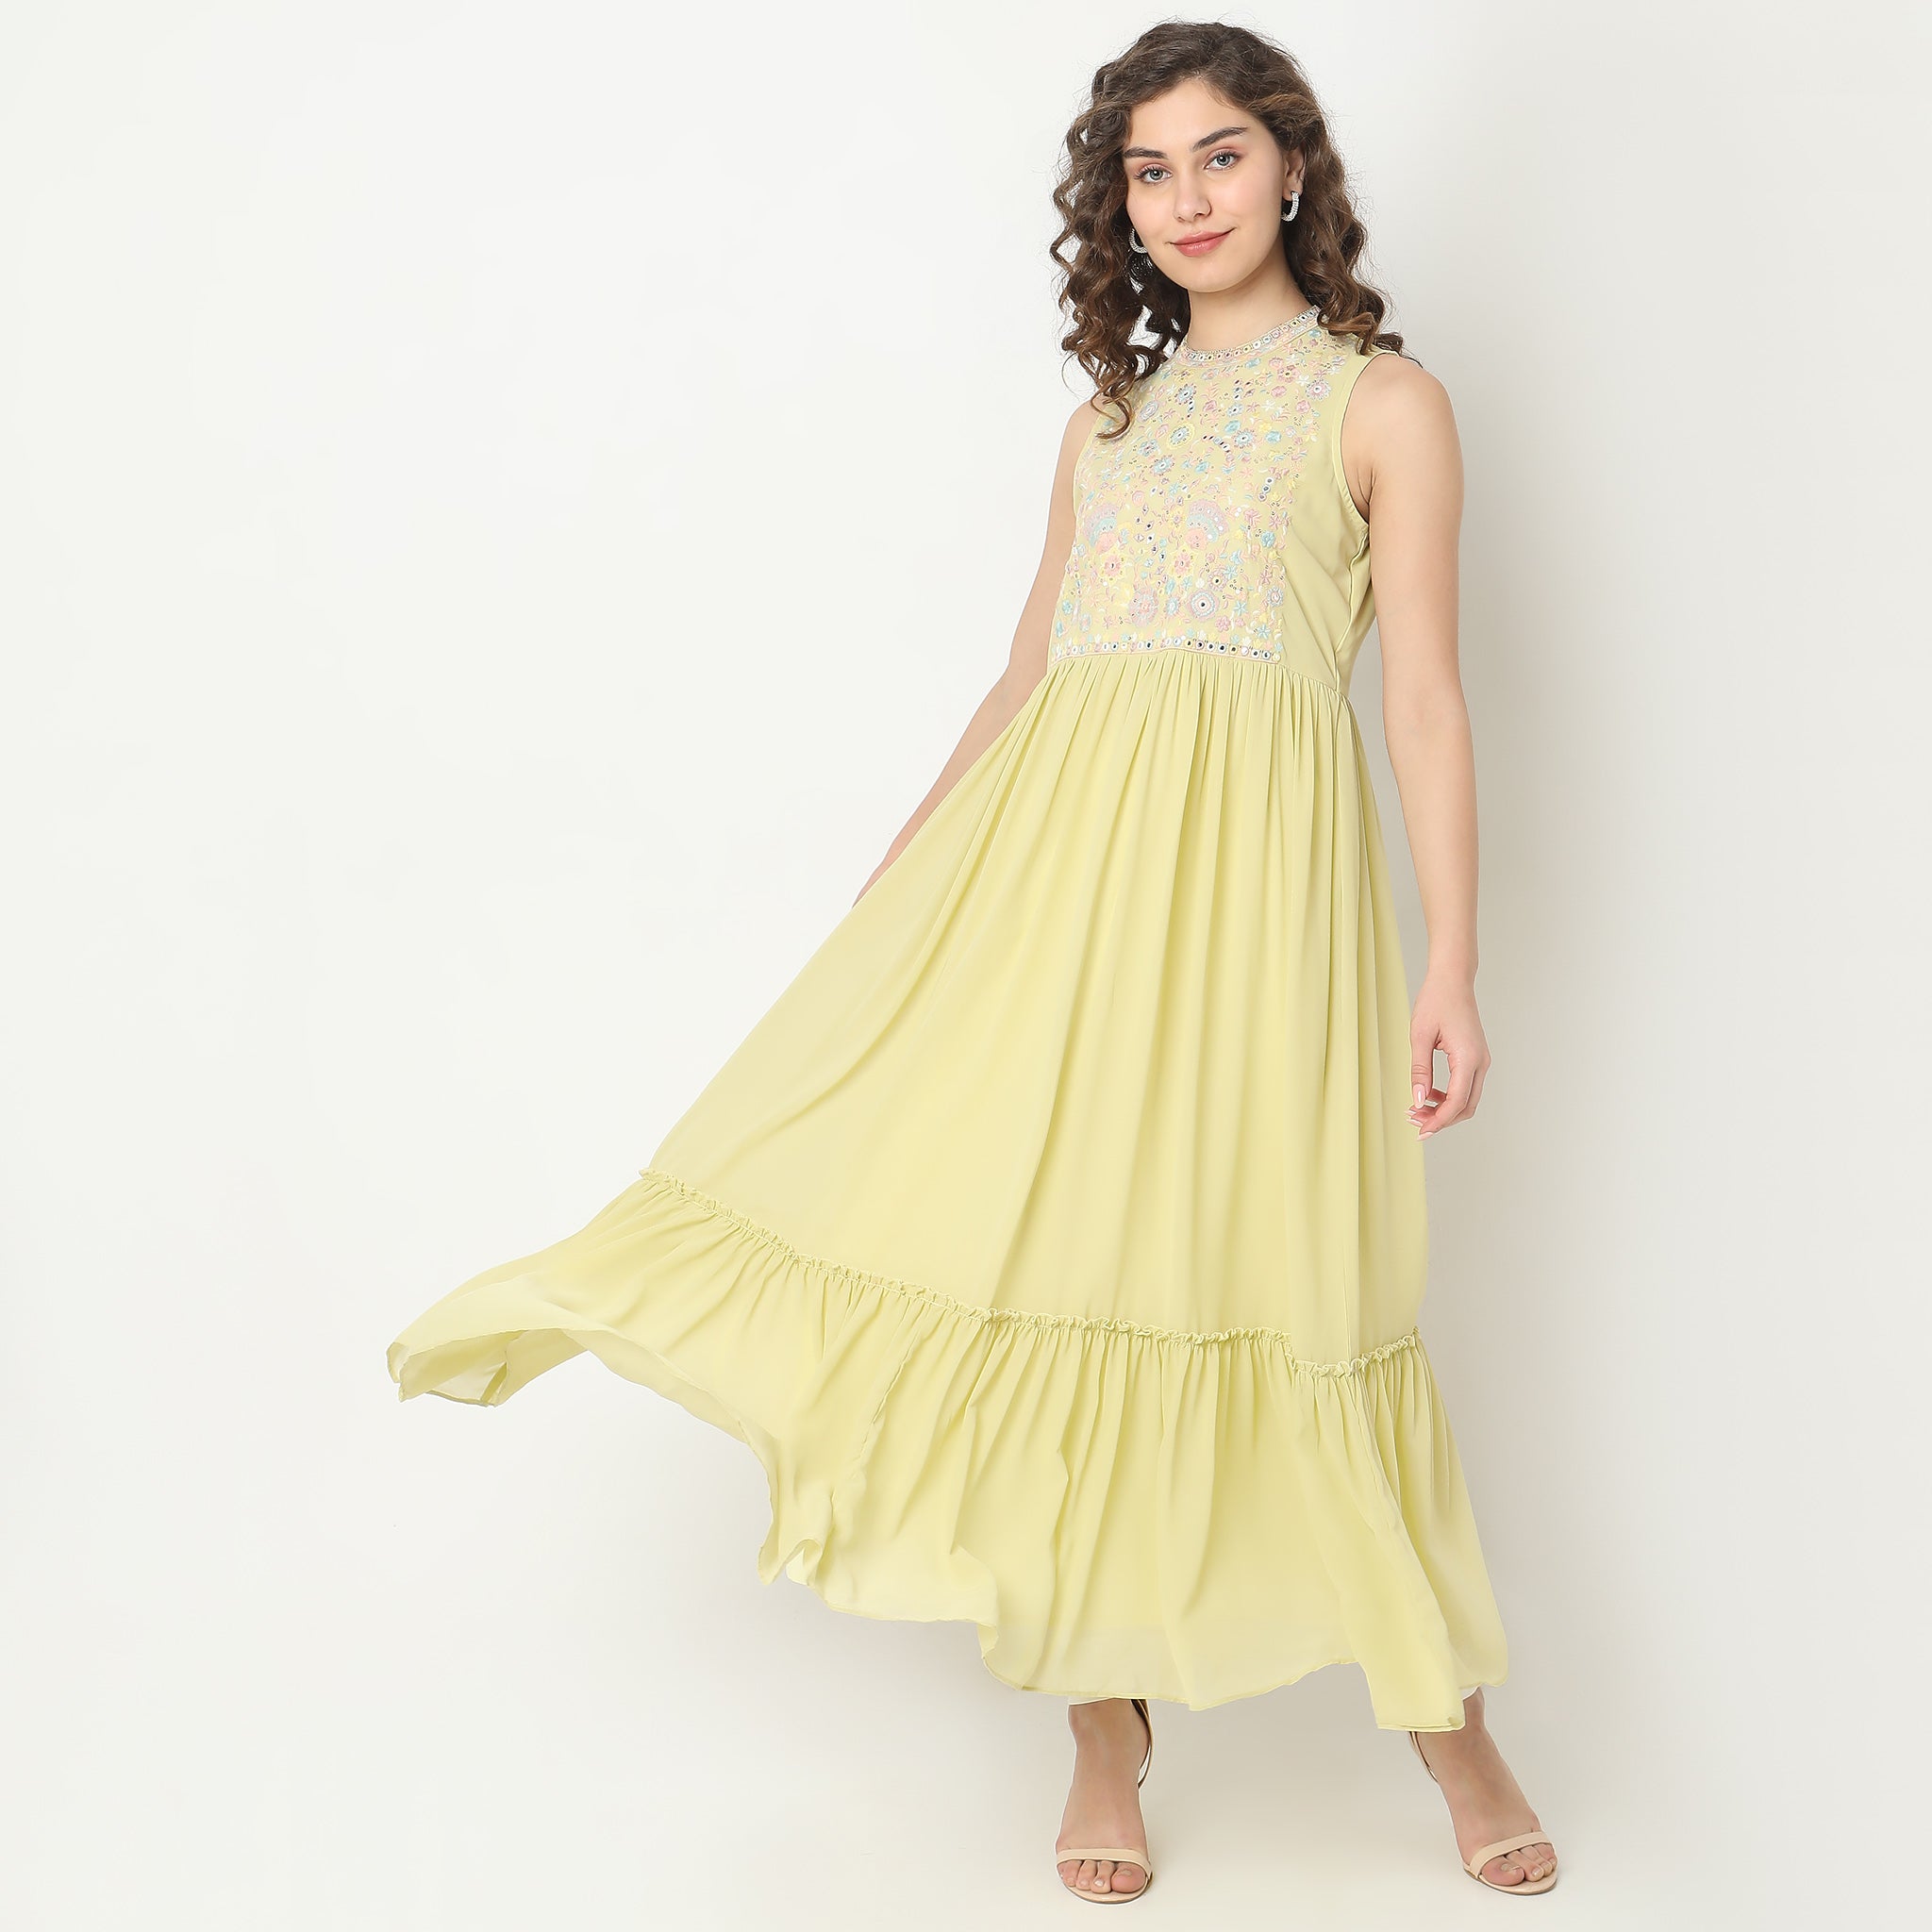 Wedding Party Maxi Dresses - Buy Wedding Party Maxi Dresses online in India